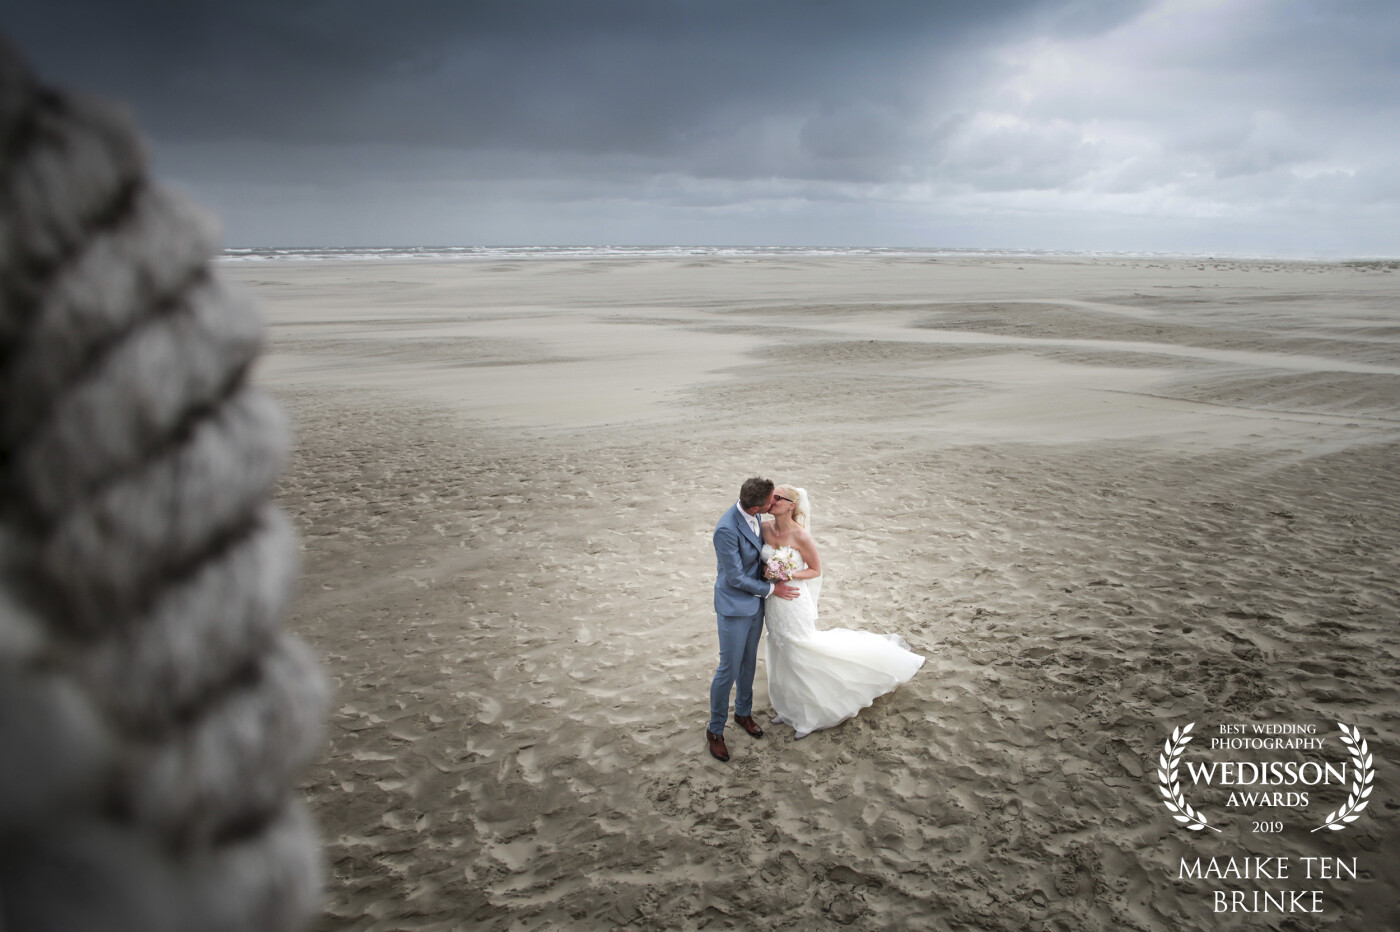 A stormy day in June on the lovely island Terschelling (Netherlands). With a wind force 10 it was a challenge to take pictures on the deserted beach. But we took the chance and made this lovely picture. <br />
Thanks, Wedisson for selecting this picture. Check out more of this couple on www.maaikefotografie.com